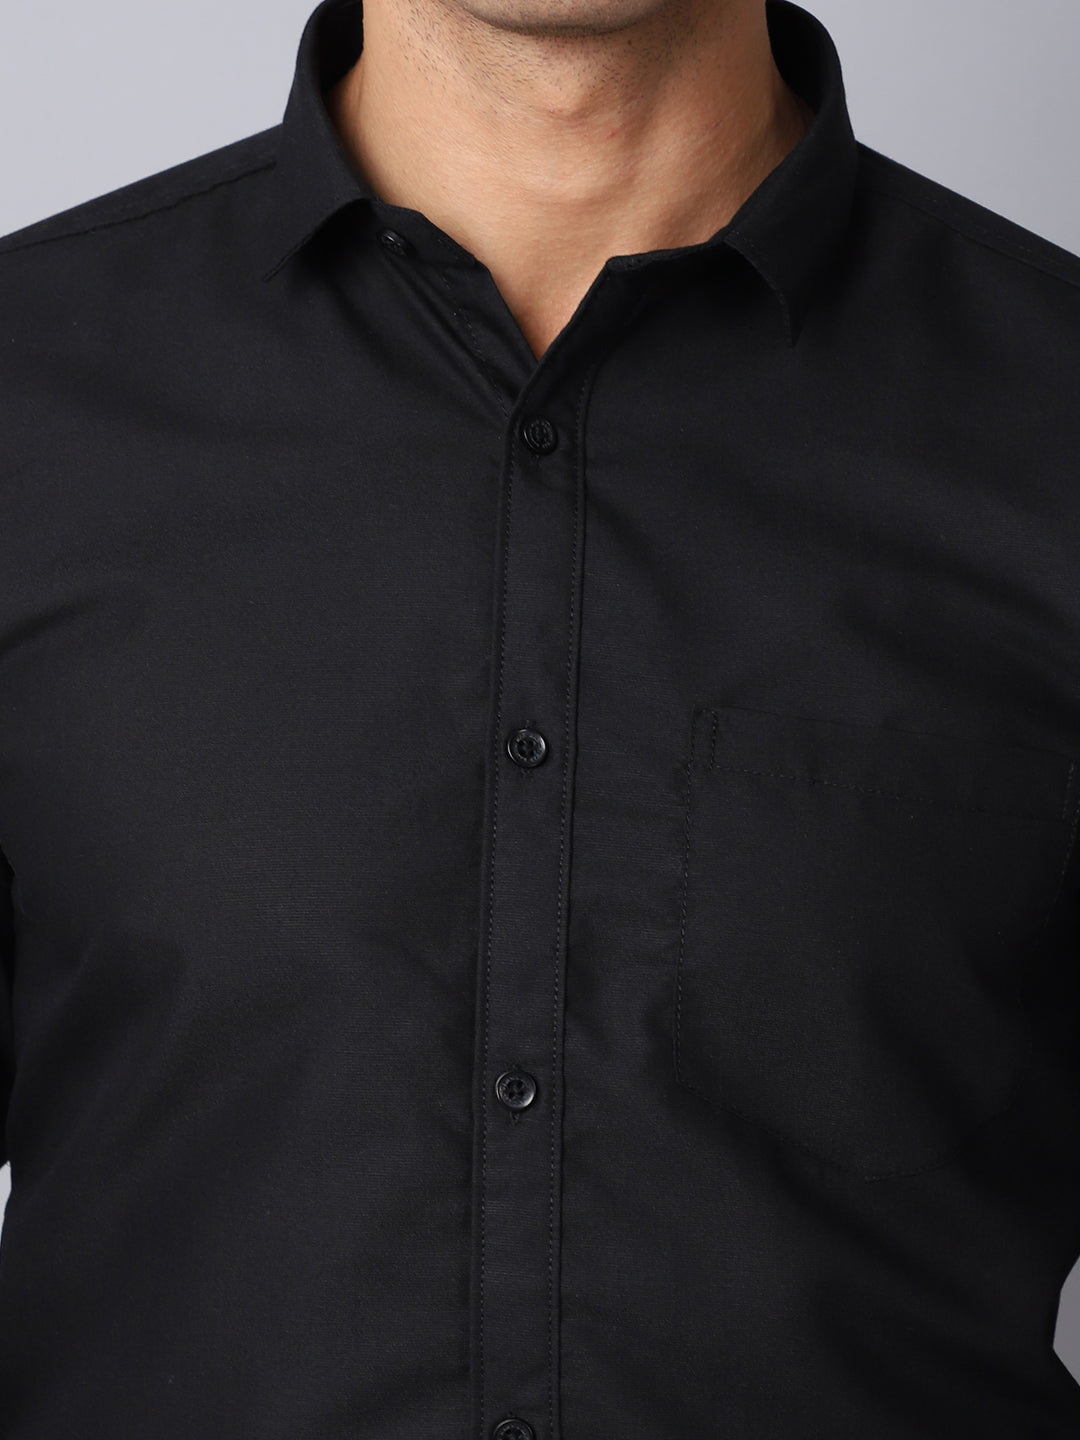 Appriciable Casual Solid Shirt - Black